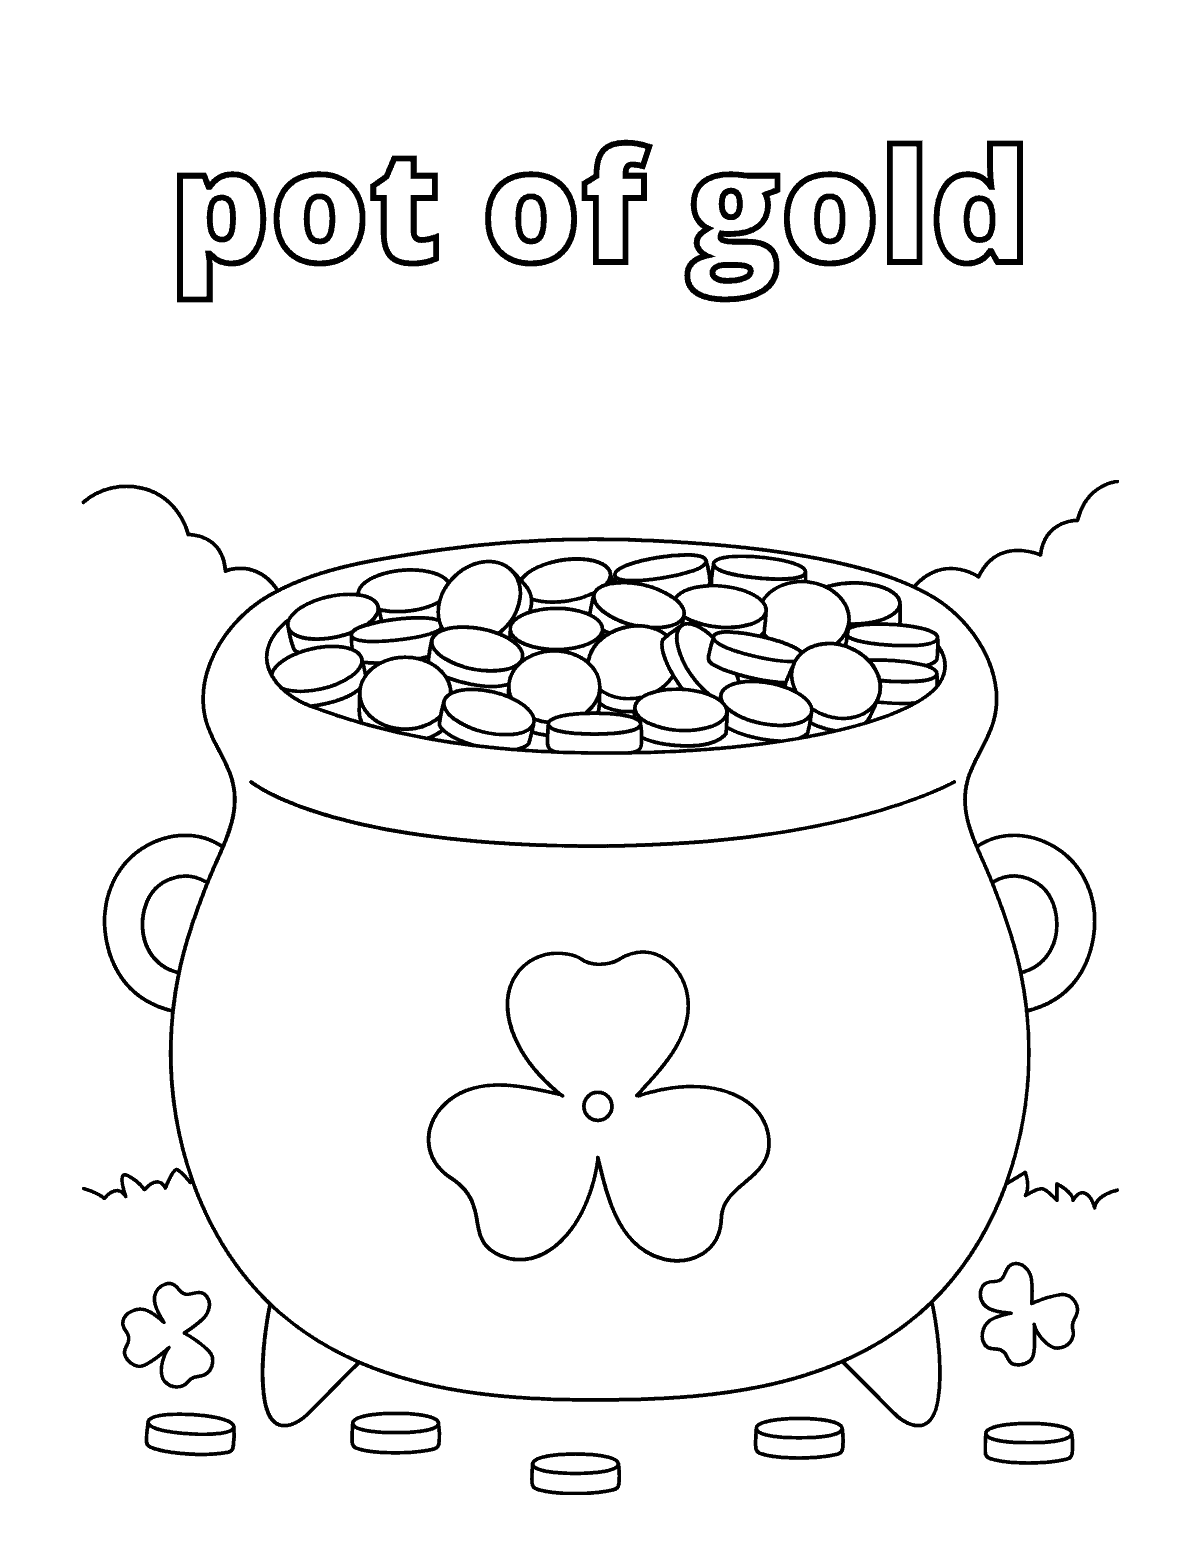 Pot of gold Printable Coloring Page